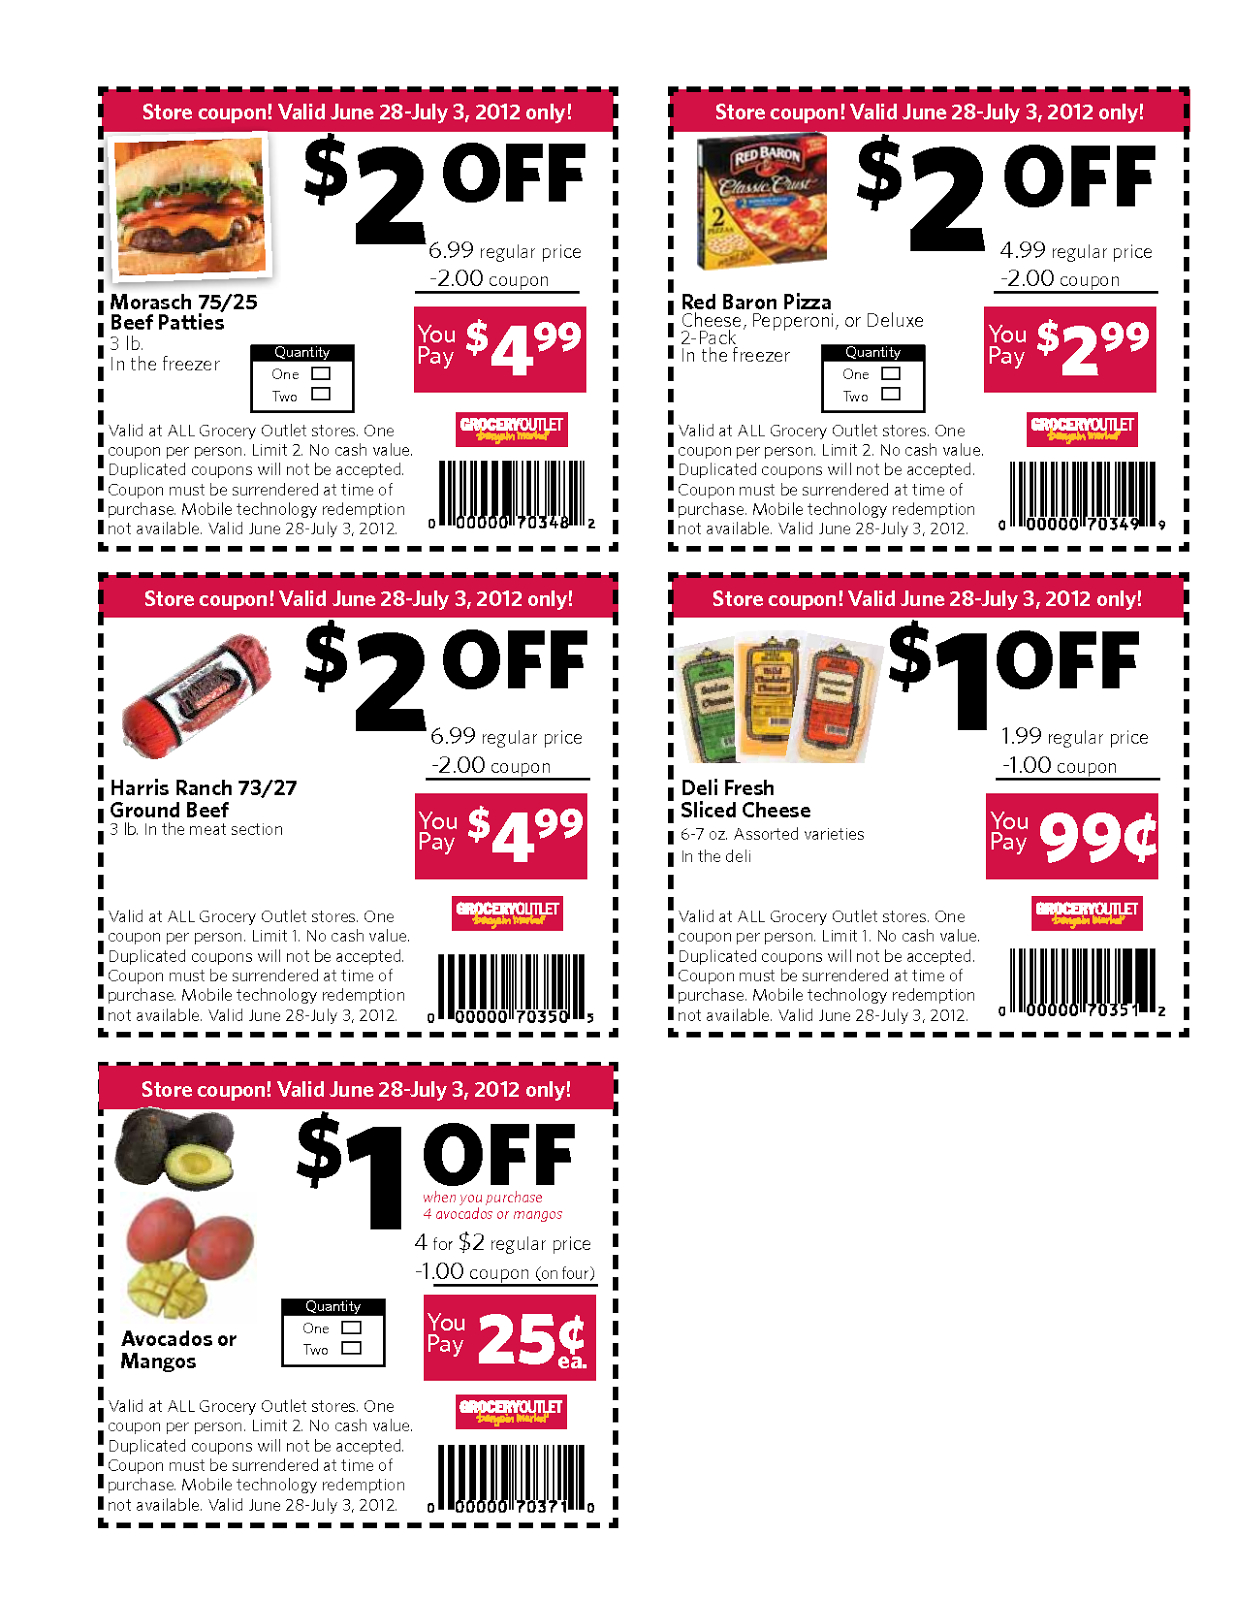 Free Coupons Printable Grocery : Pizza Hut Factoria - Free Printable Grocery Coupons